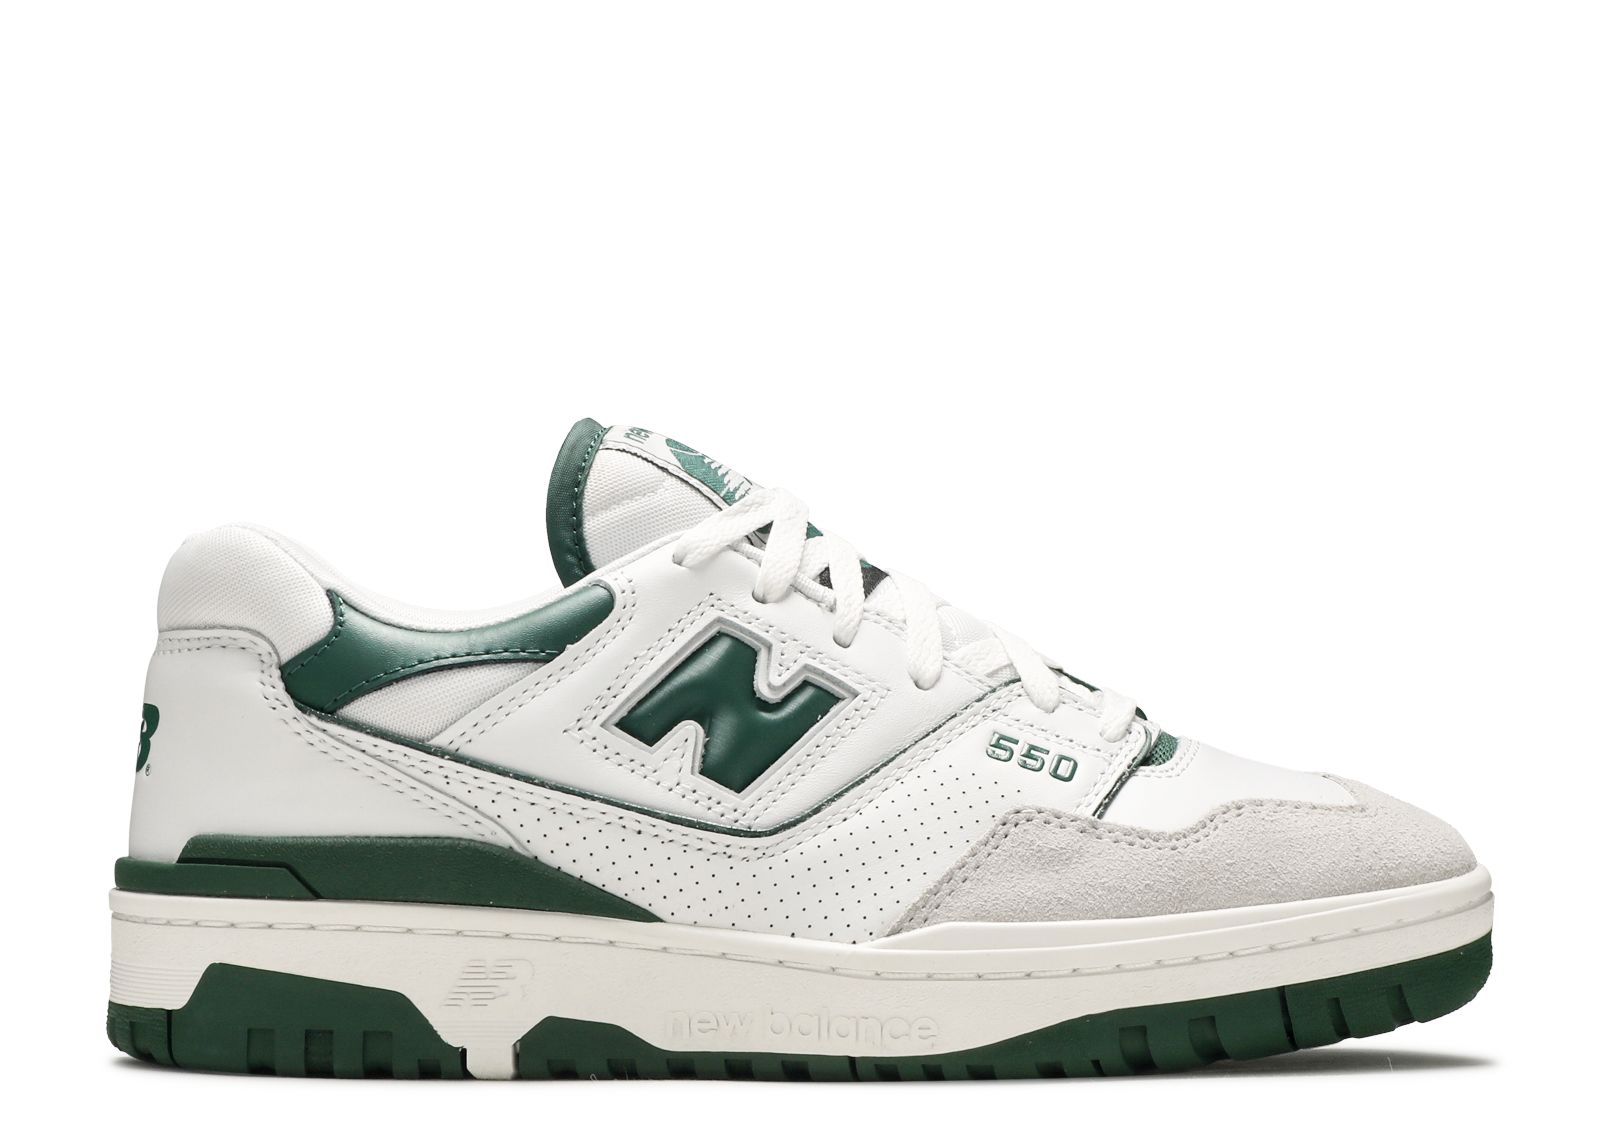 Pine Green Leather And Suede Cameo On This New Balance 550 - Sneaker News